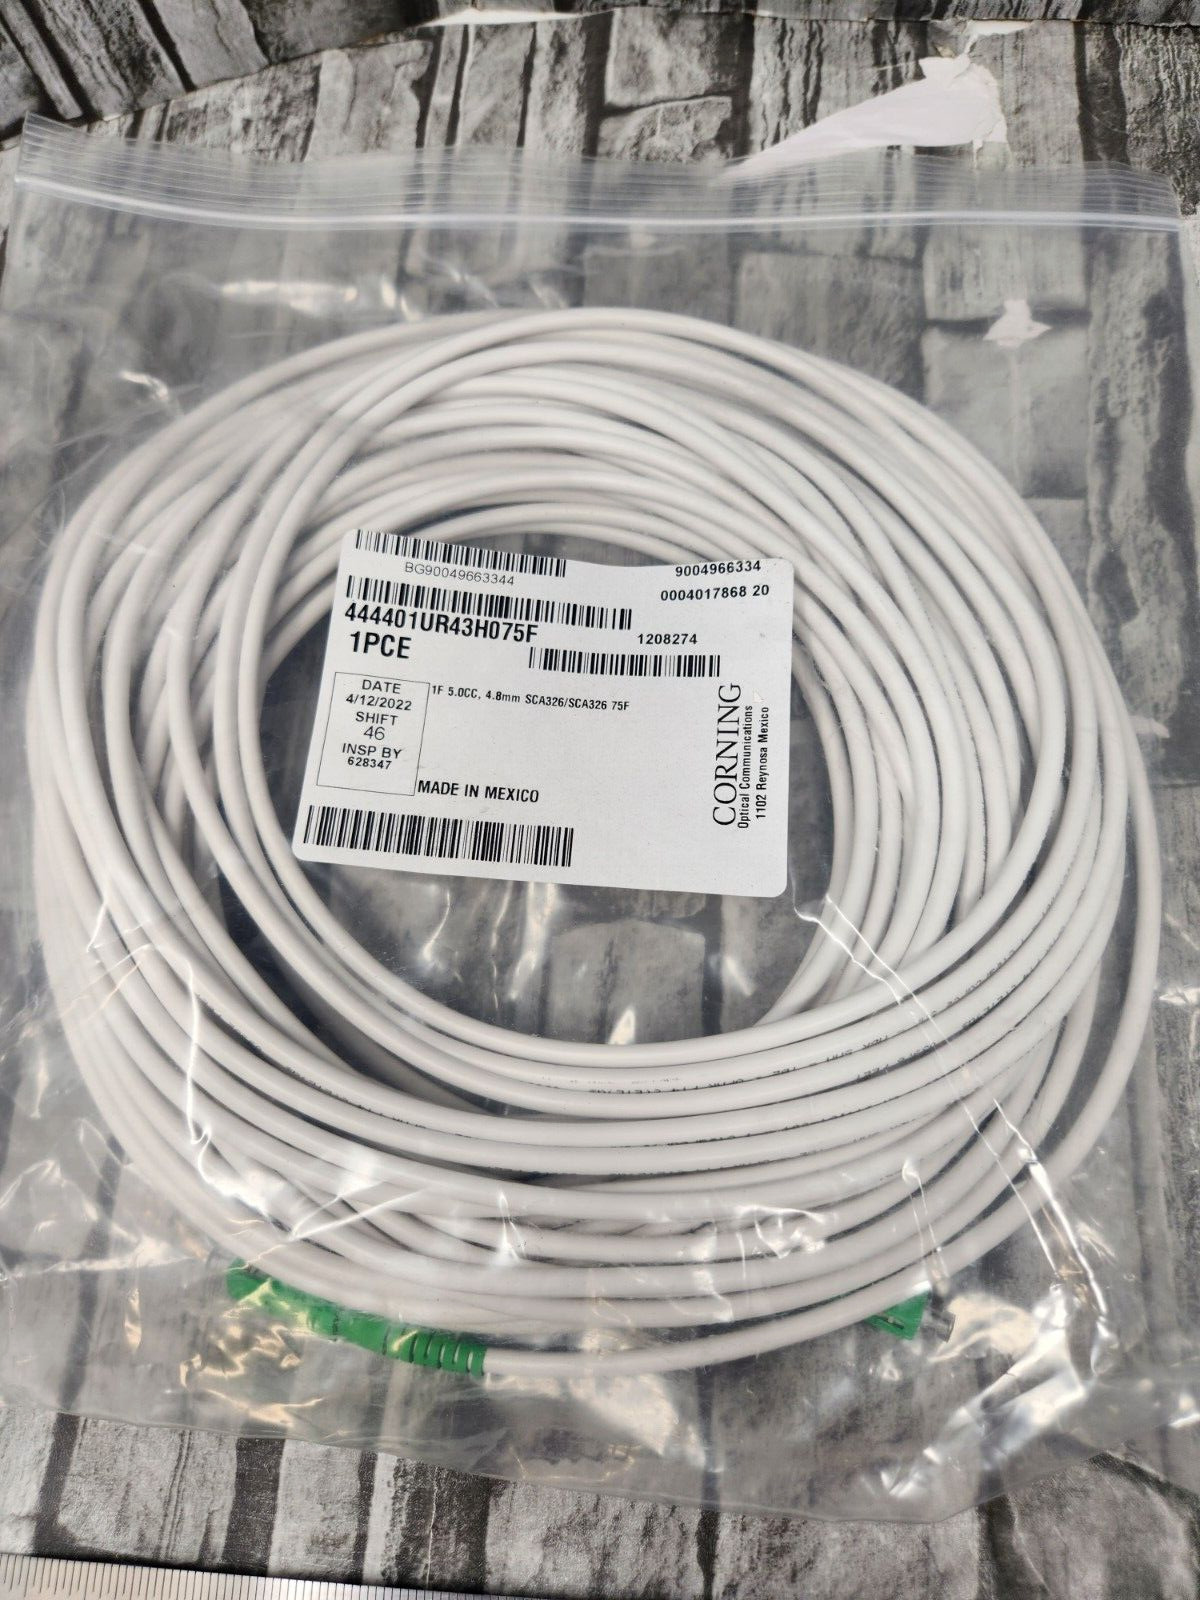 CORNING 444401UR43H075F Jumper Fiber Cable Assembly 75 ft Ruggedized Drop Cable